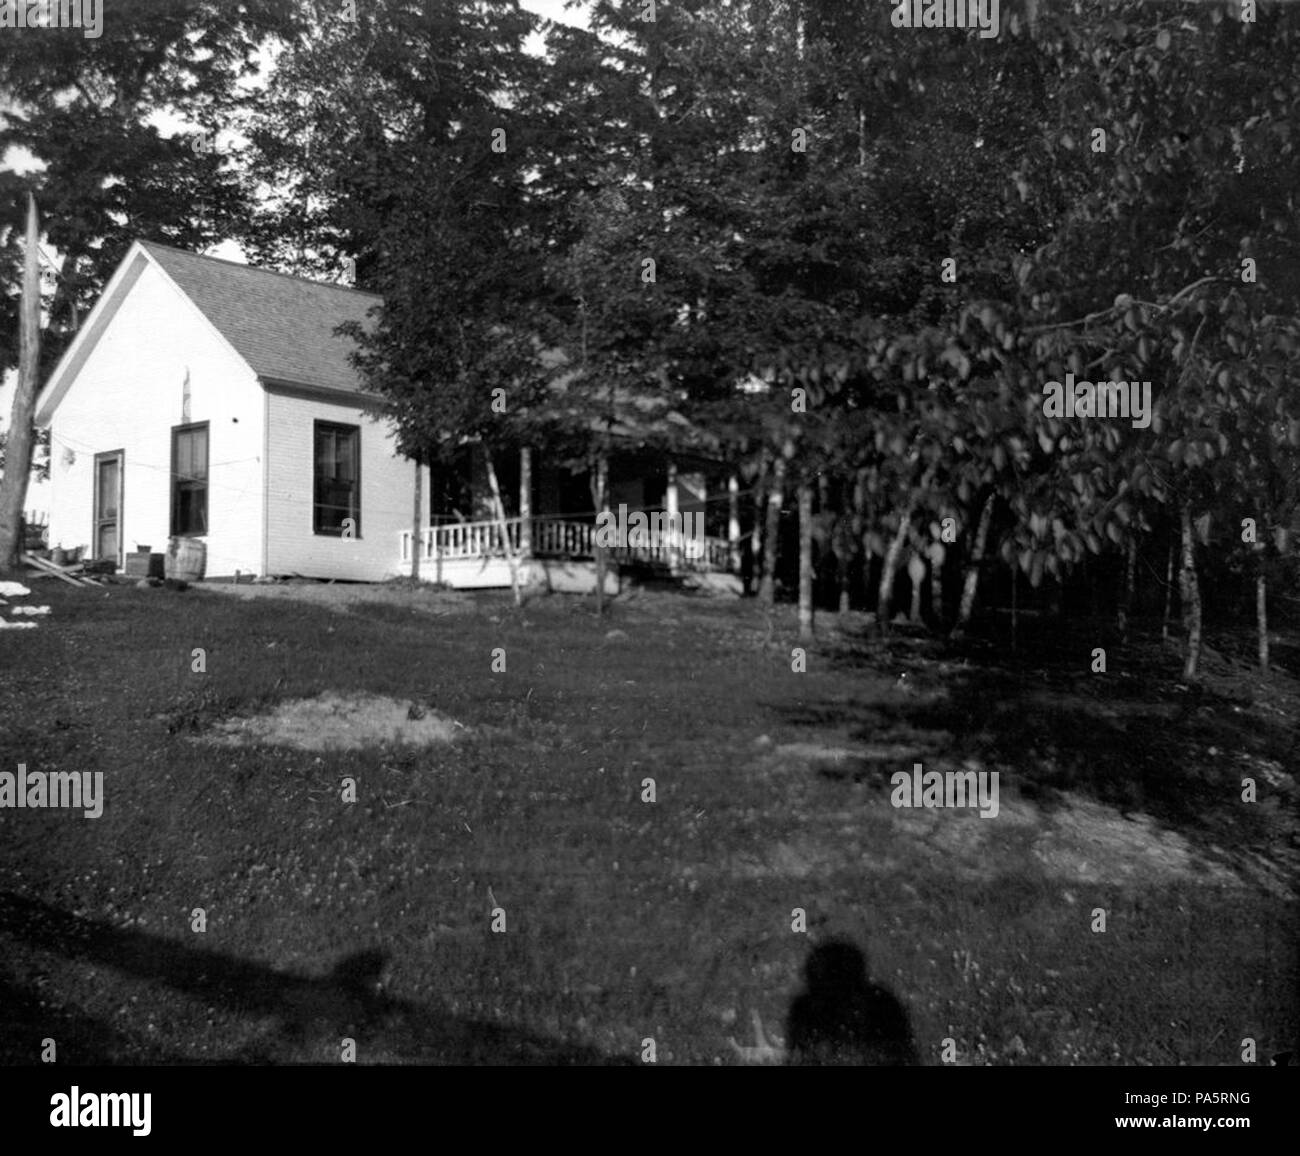 . English: EH567N nd.Windemere cottage. Walloon Lake, Michigan.Early Years, 1899-1921: Box 1 Folder 22Please credit: 'Photographer unknown. Papers of Ernest Hemingway. Photograph Collection. John F. Kennedy Presidential Library and Museum, Boston'   This is an image of a place or building that is listed on the National Register of Historic Places in the United States of America. Its reference number is 68000026   . circa 1920 625 Ernest Hemingway Cottage EH1 Stock Photo